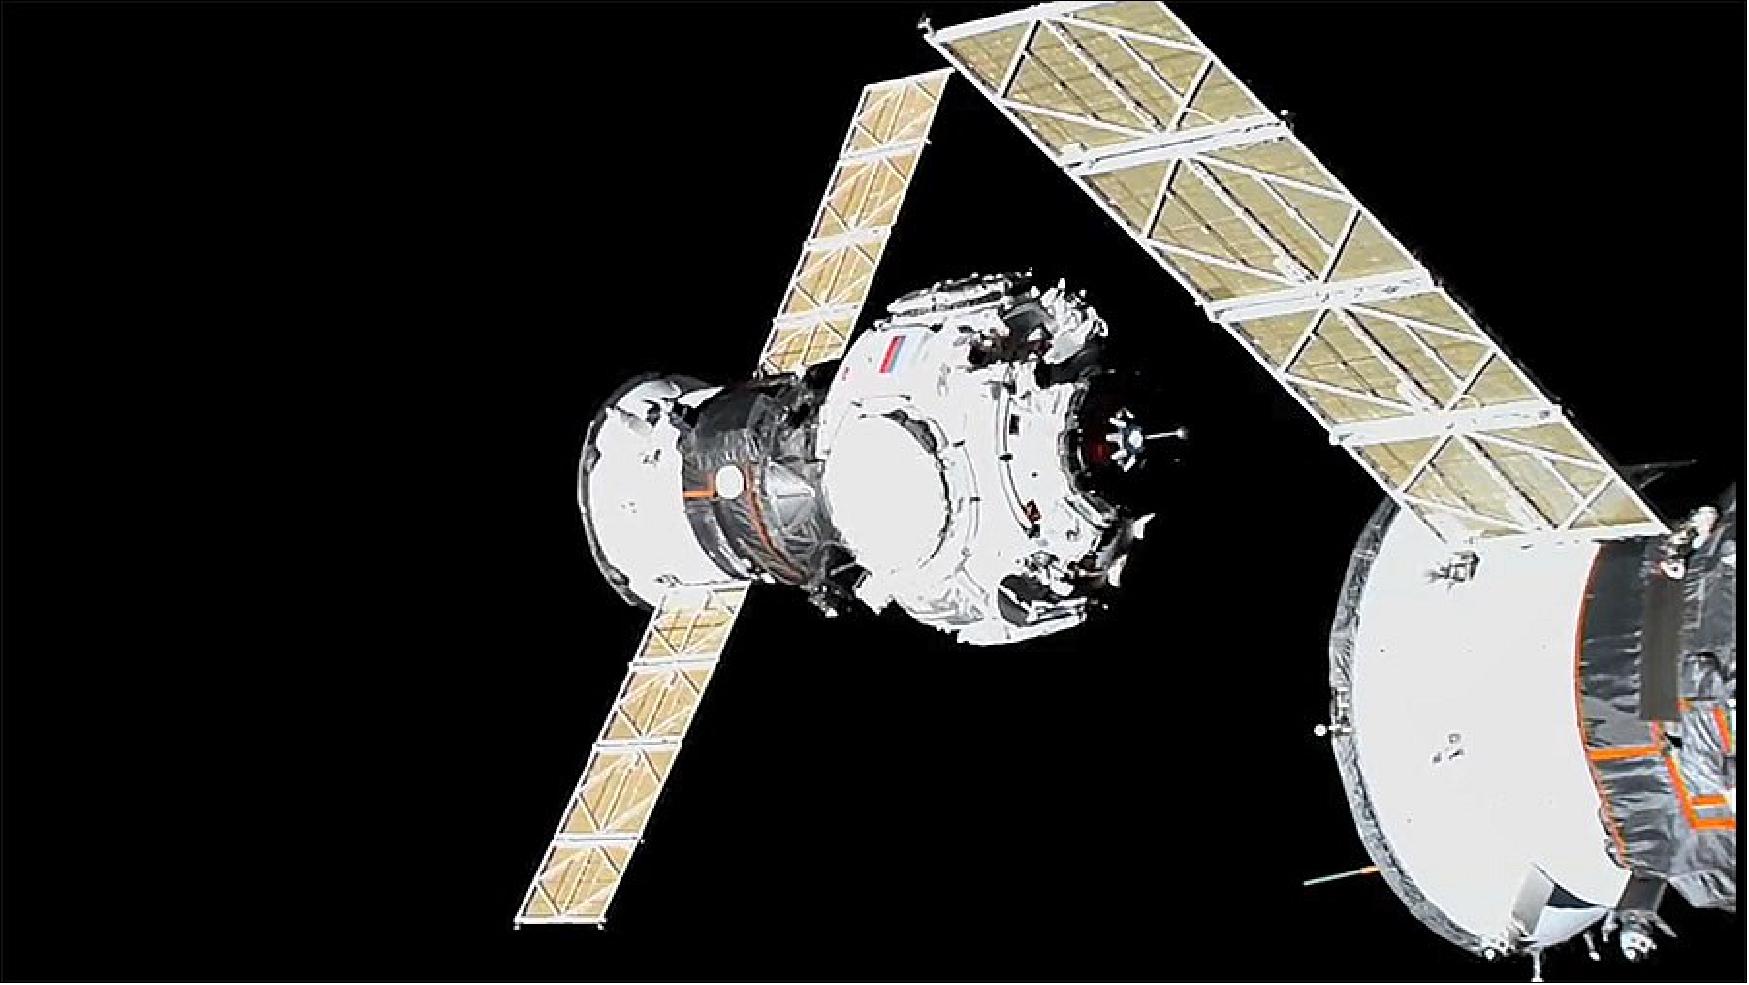 Figure 9: Russia’s new Prichal docking module arrives at the station providing additional docking ports and fuel transfer capabilities (image credit: NASA TV)